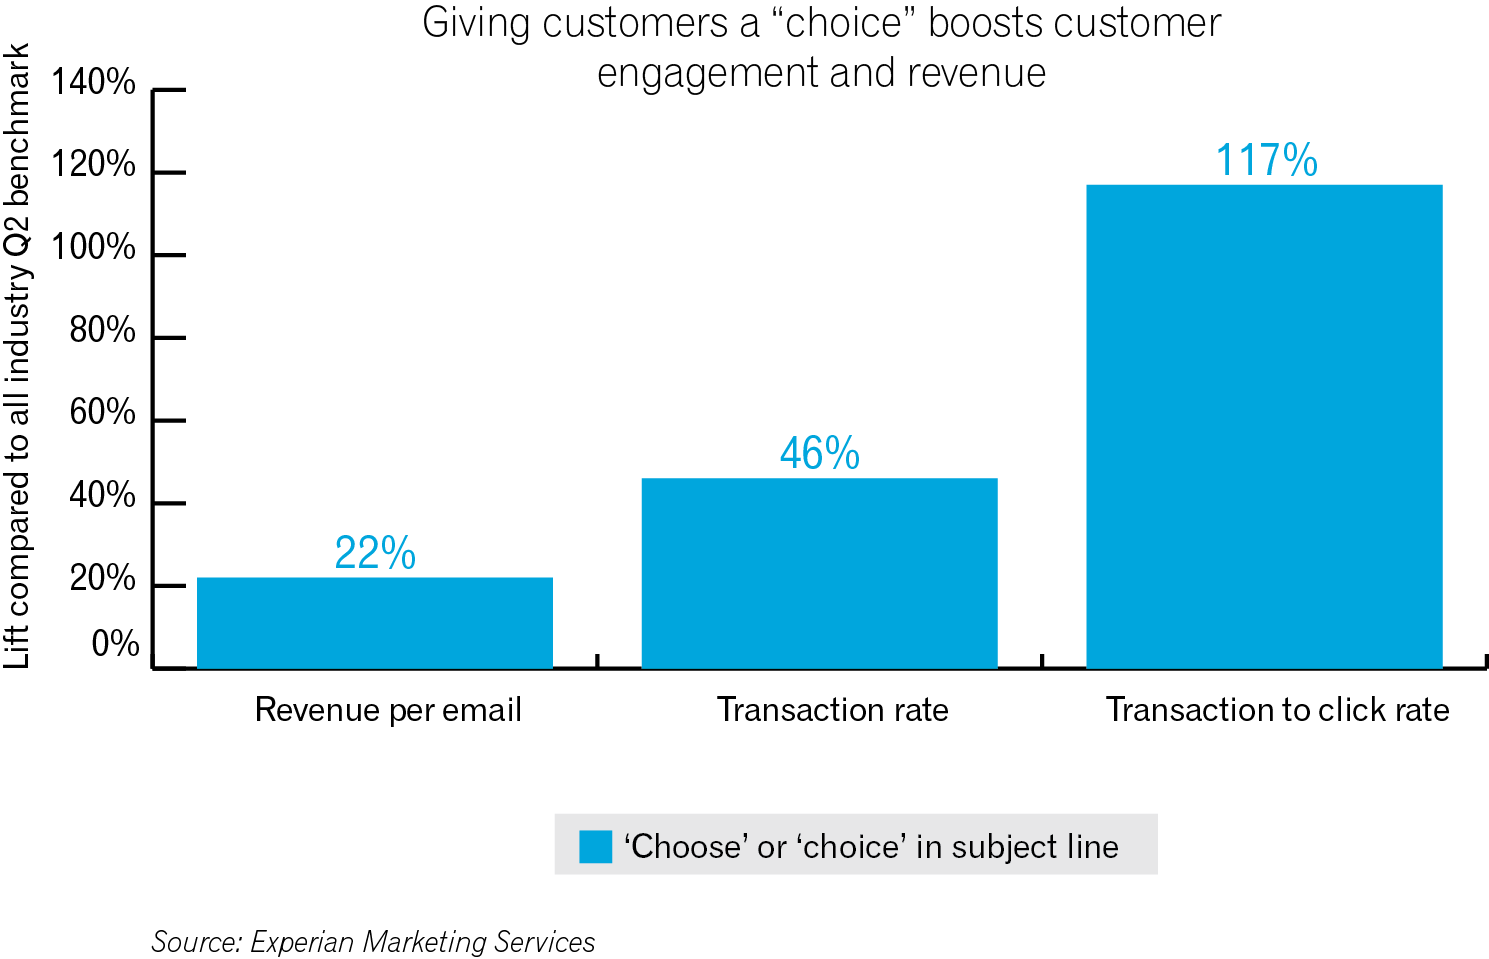 Q2 2015 Email Benchmark_Giving customers choice